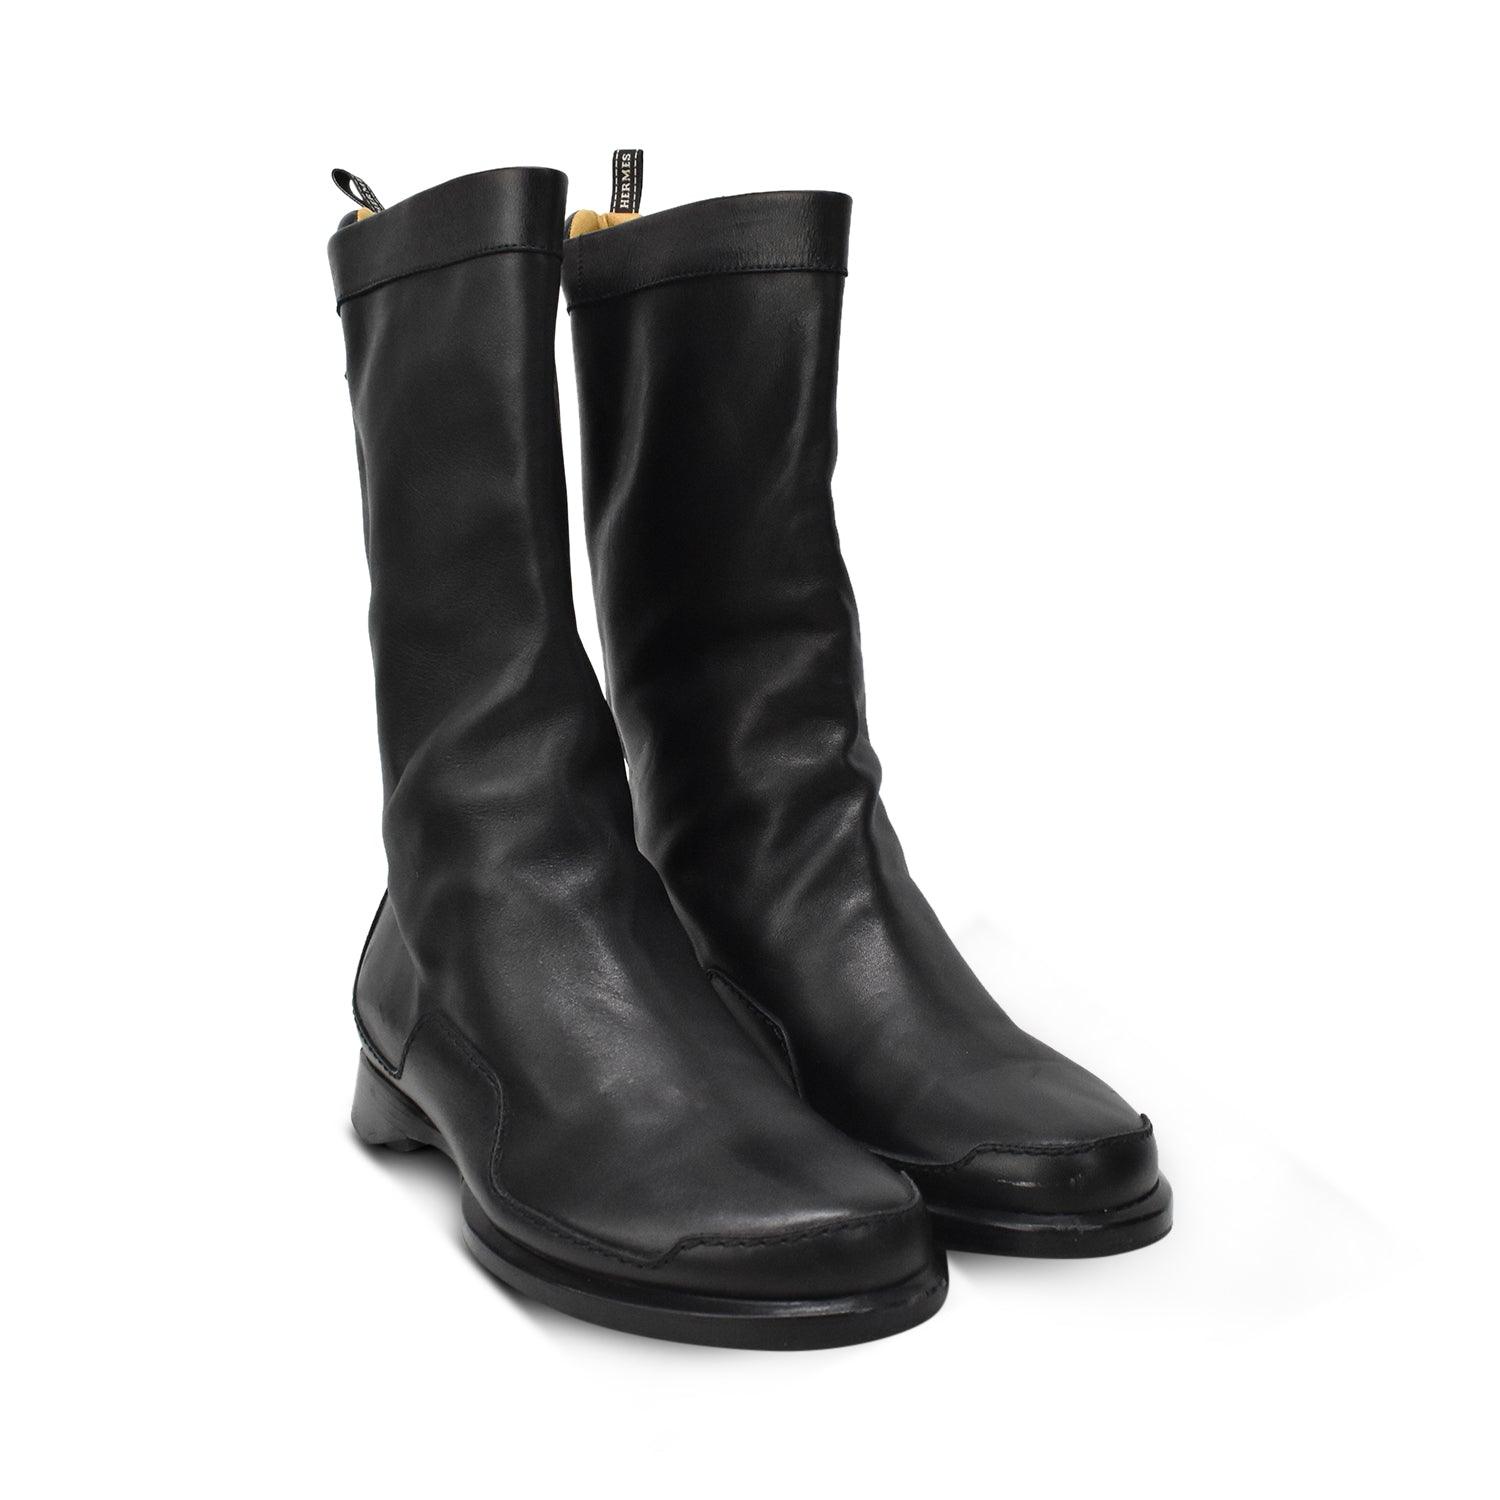 Hermes Boots - Women's 35.5 - Fashionably Yours